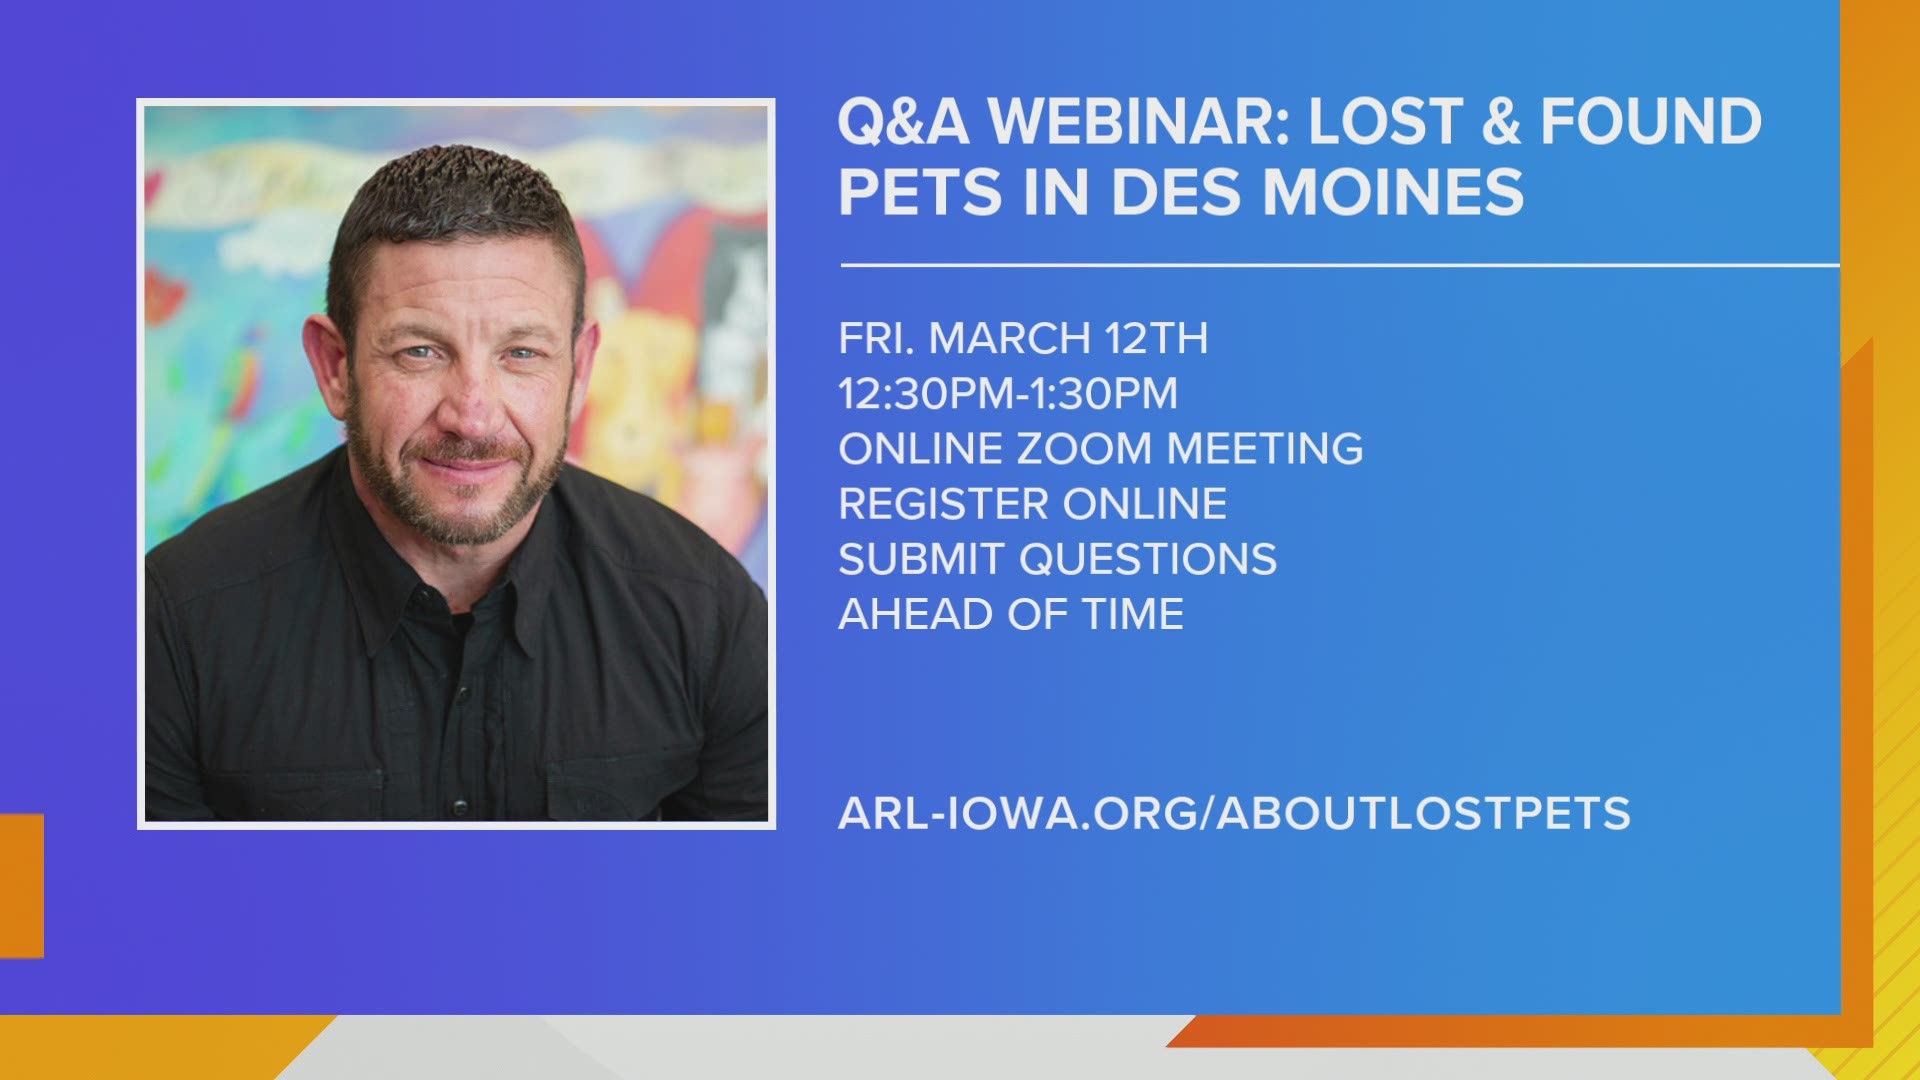 No Place Like Home Challenge is a webinar hosted by Joe Stafford at the Animal Rescue League of Iowa that will help if you lost a pet.